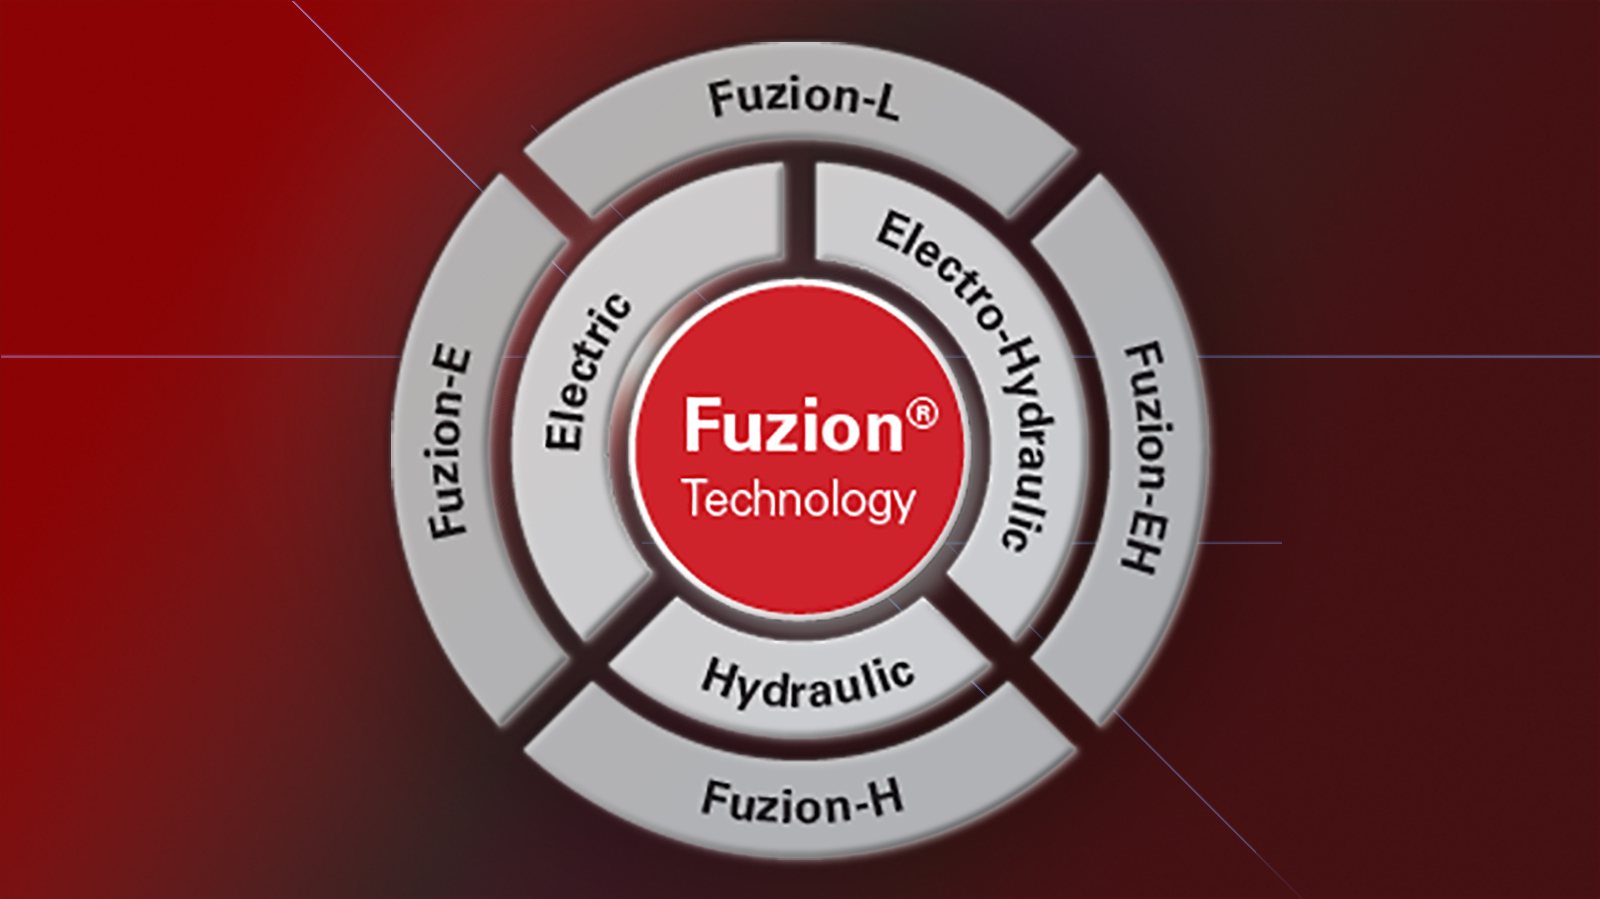 Fuzion products